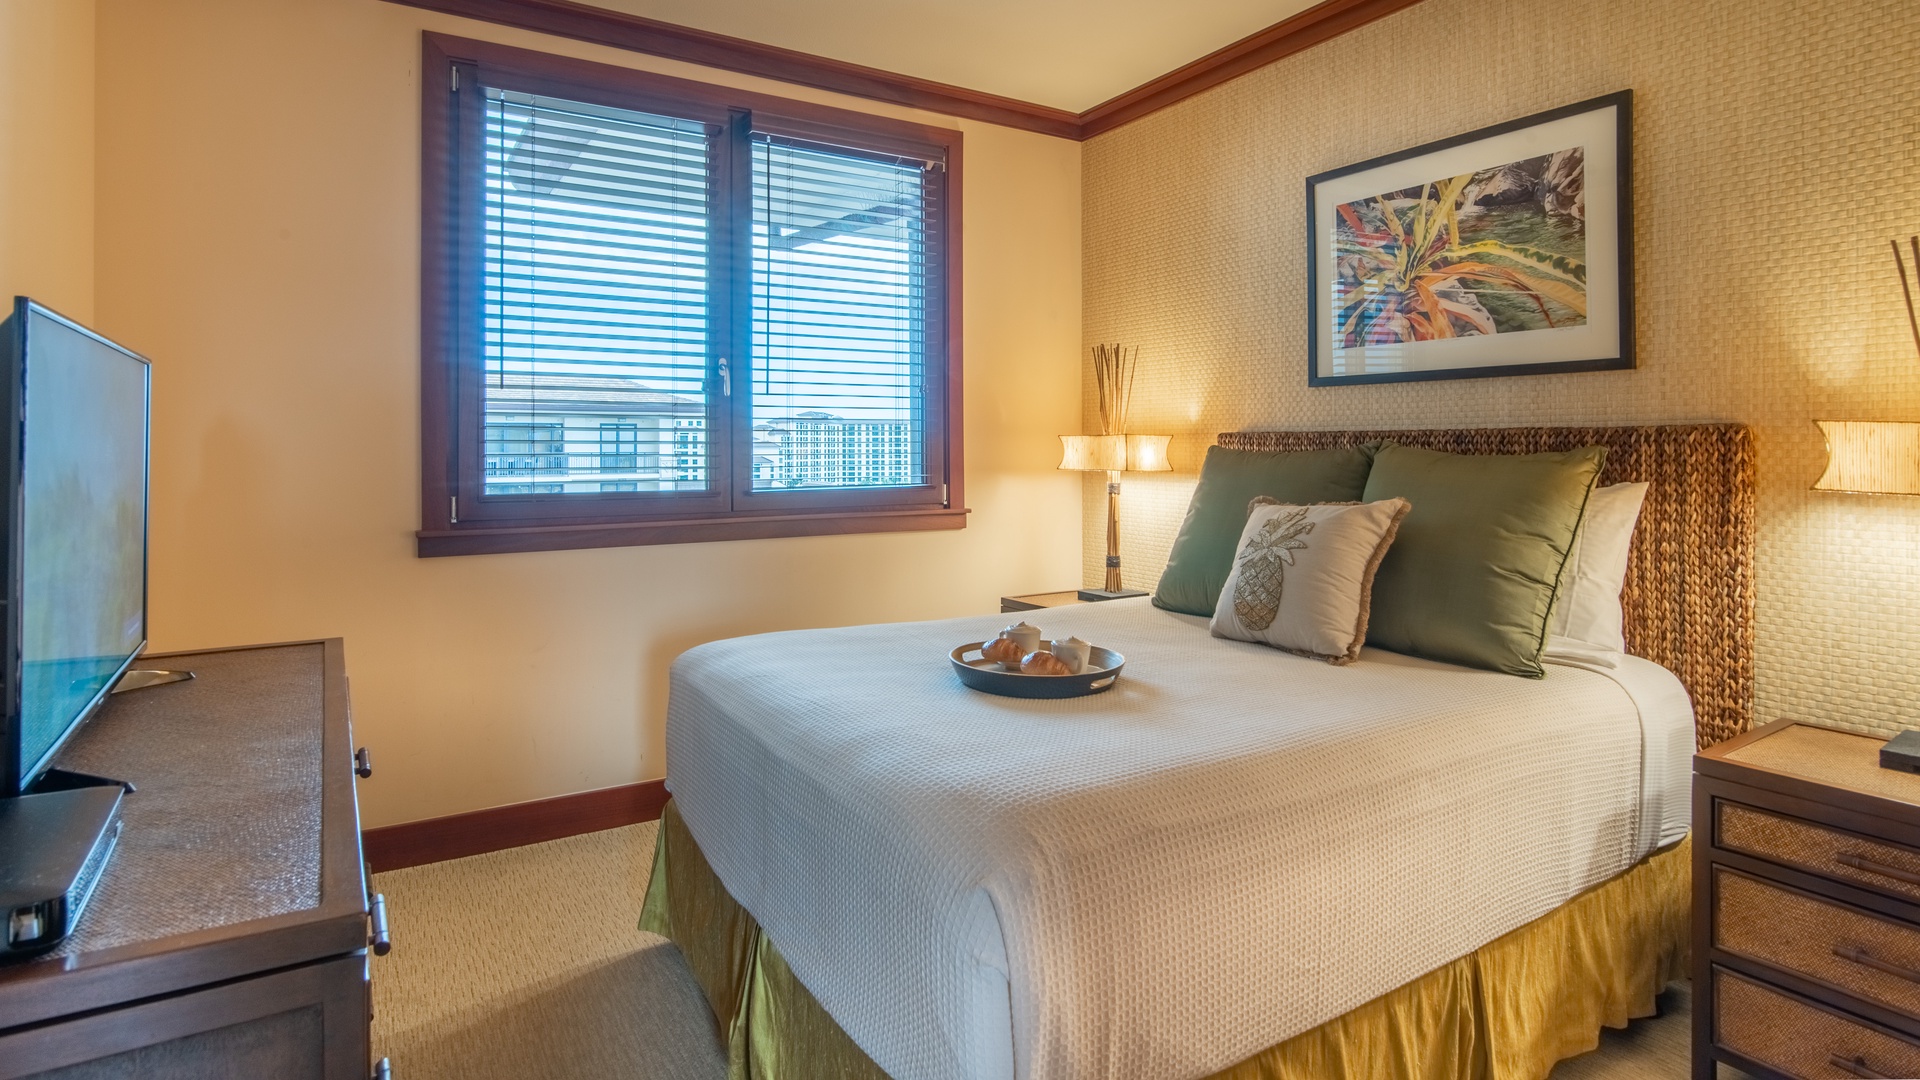 Kapolei Vacation Rentals, Ko Olina Beach Villas O1111 - The second guest bedroom with a queen bed and plush accents.